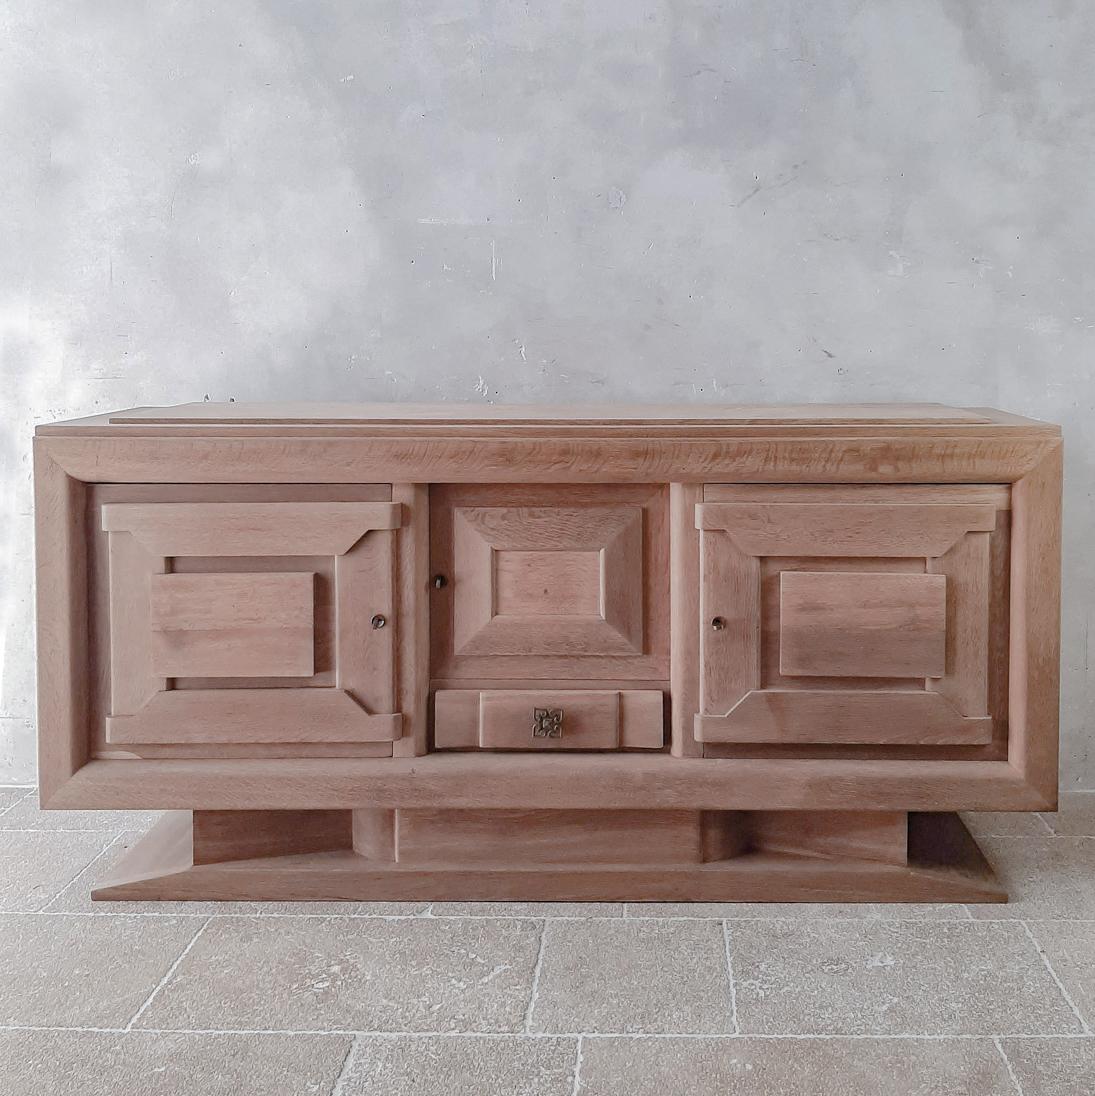 Mid-century design credenza by Charles Dudouyt in bleached oak, 1940s-50s. Beautiful sideboard in pre-Brutalist Art Deco style decorated with typical geometric shapes of Dudouyt. The base gives this sideboard an extra sturdy